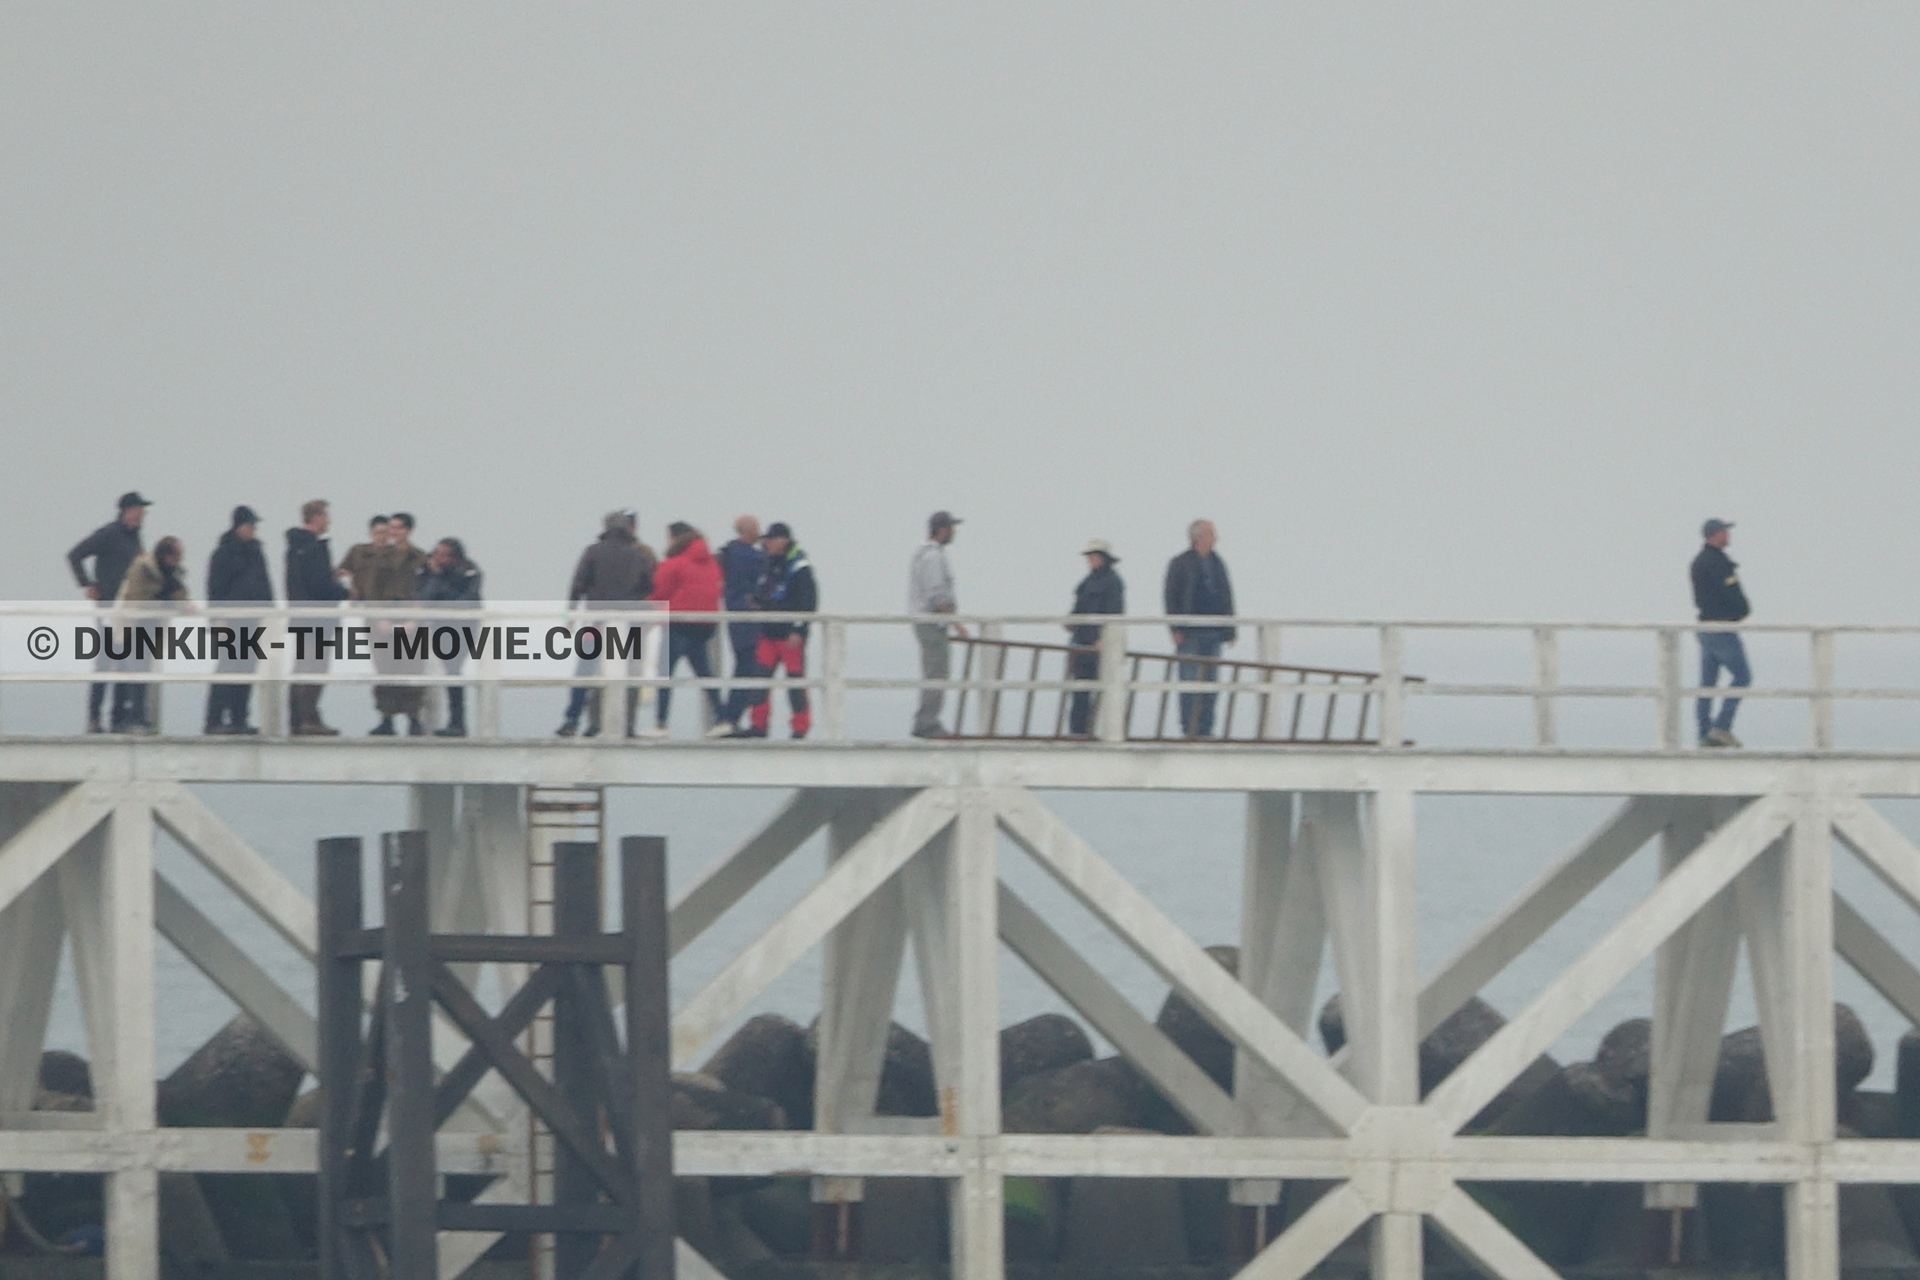 Picture with actor, grey sky, Hoyte van Hoytema, EST pier, Christopher Nolan, technical team, Nilo Otero,  from behind the scene of the Dunkirk movie by Nolan